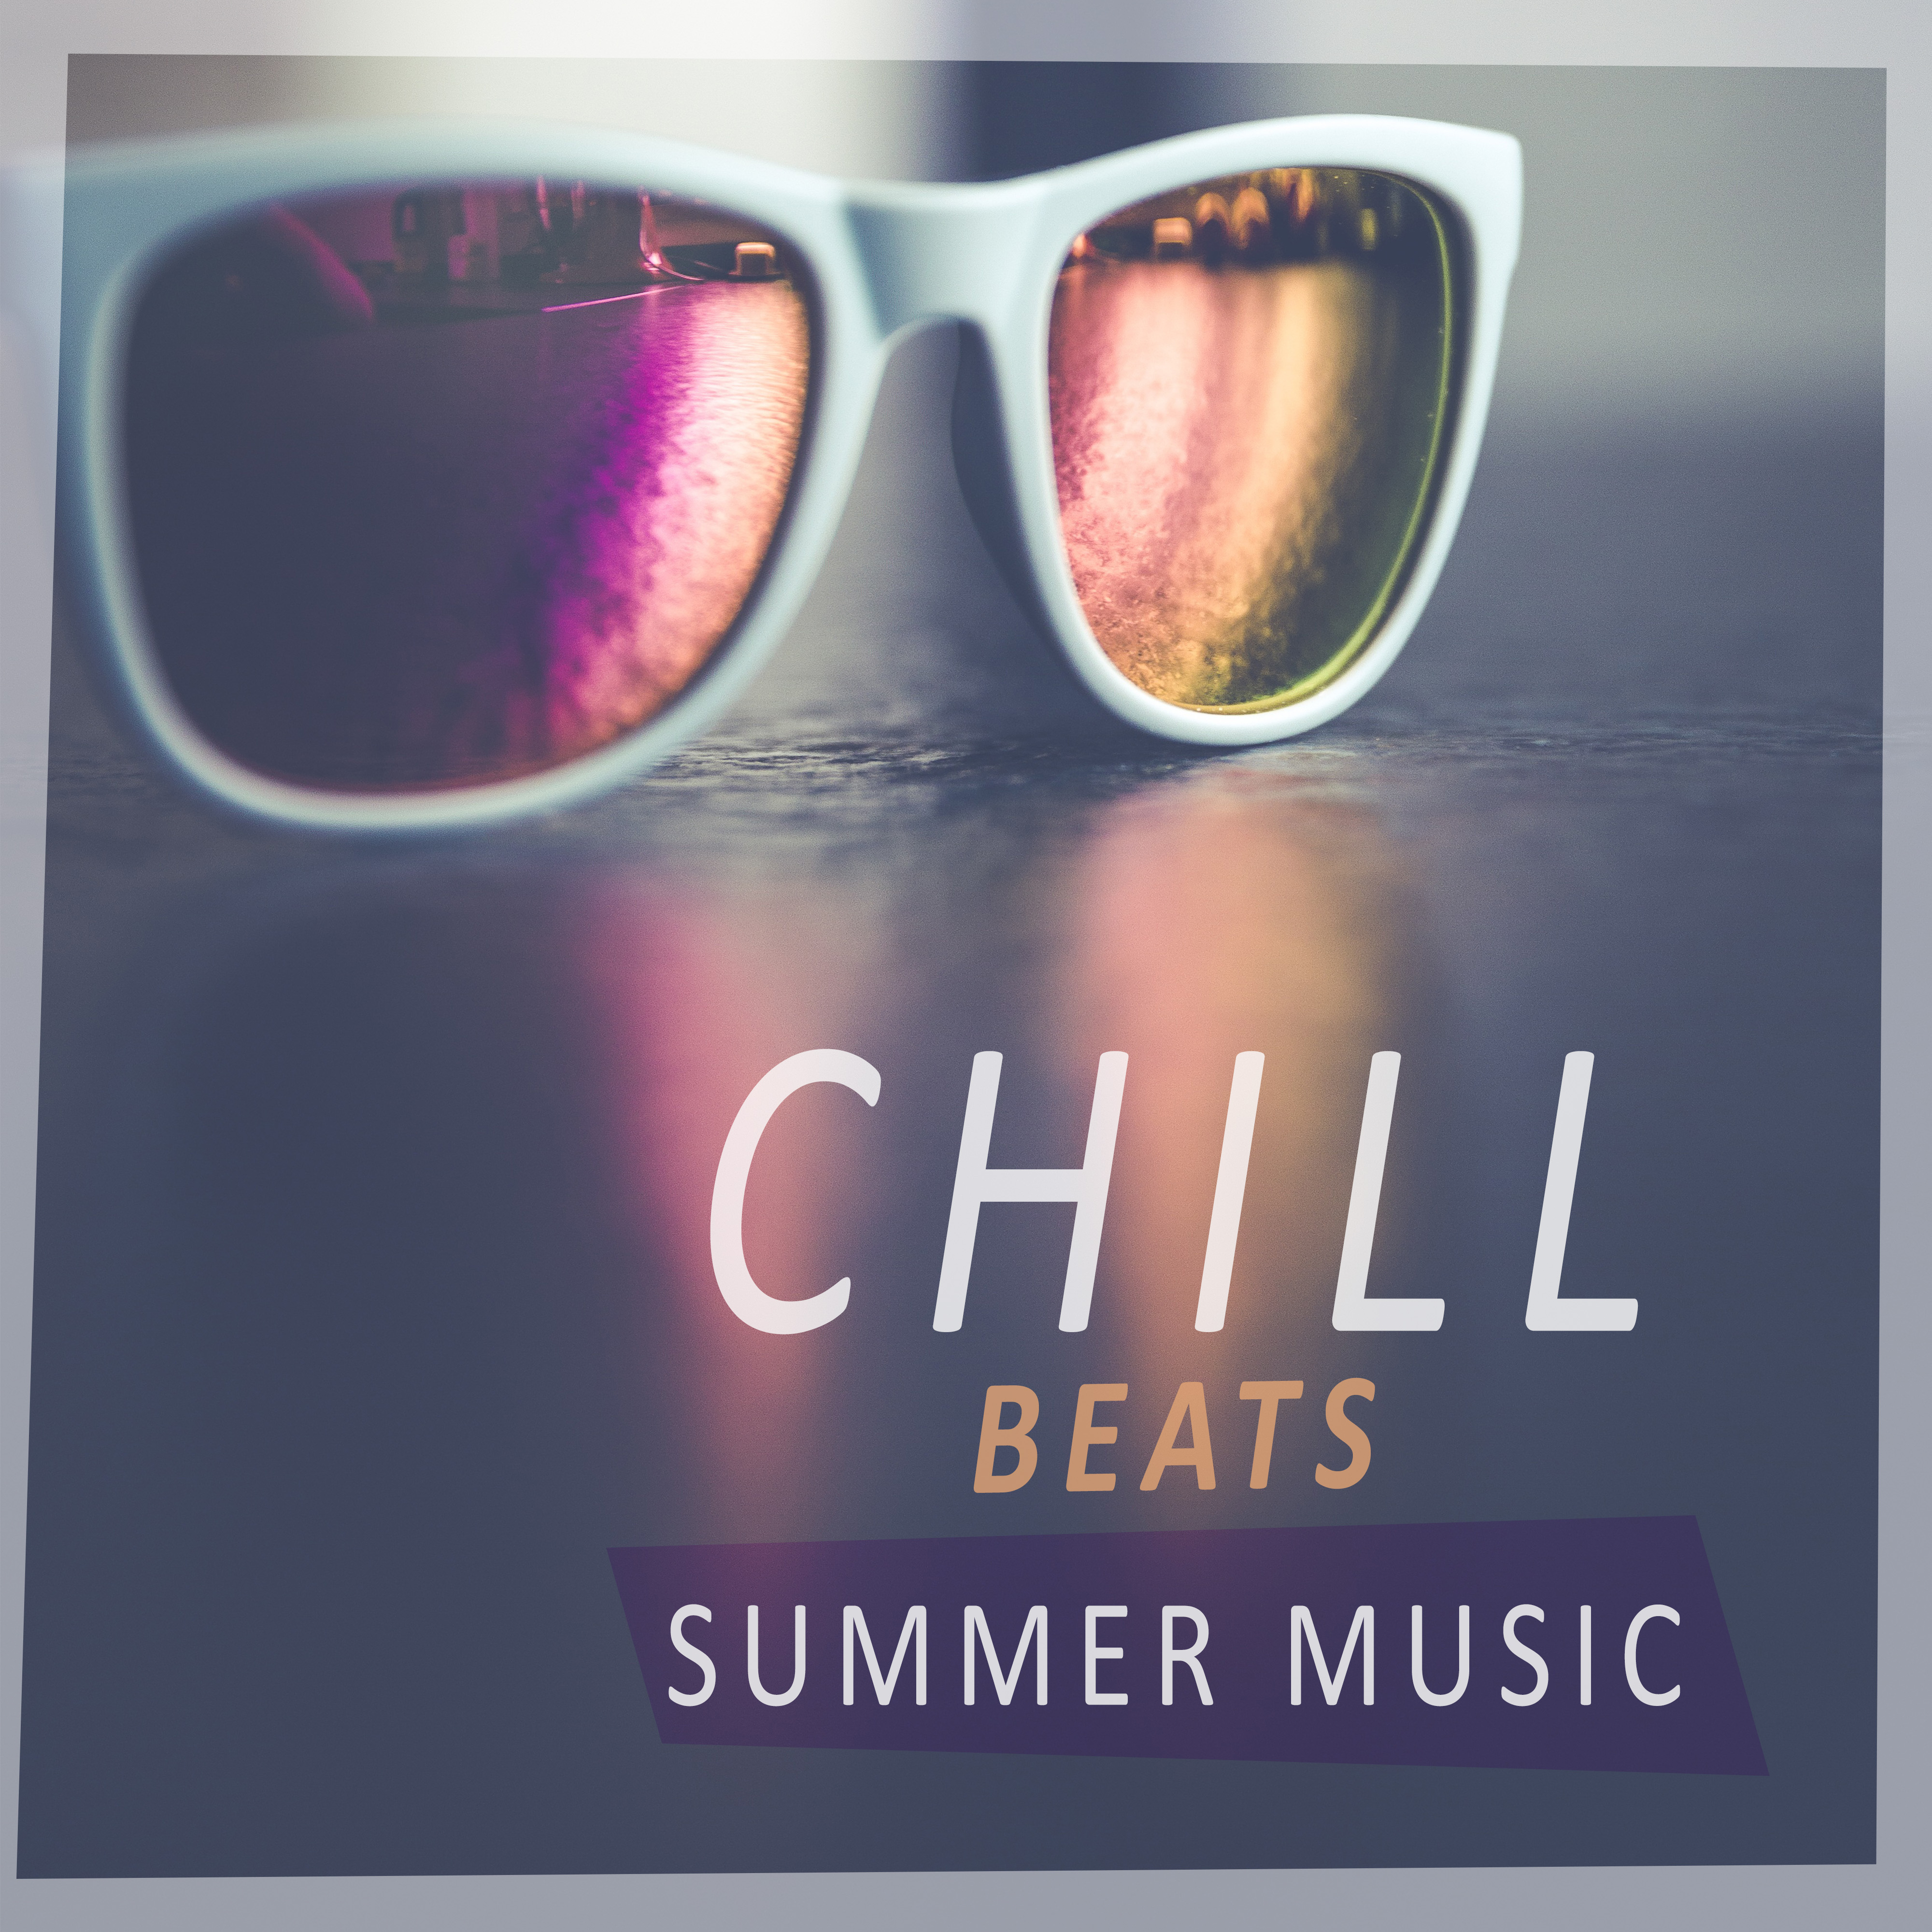 Chill Beats Summer Music – Chill Out Summer, Beach Party Music, Drinks & Cocktails